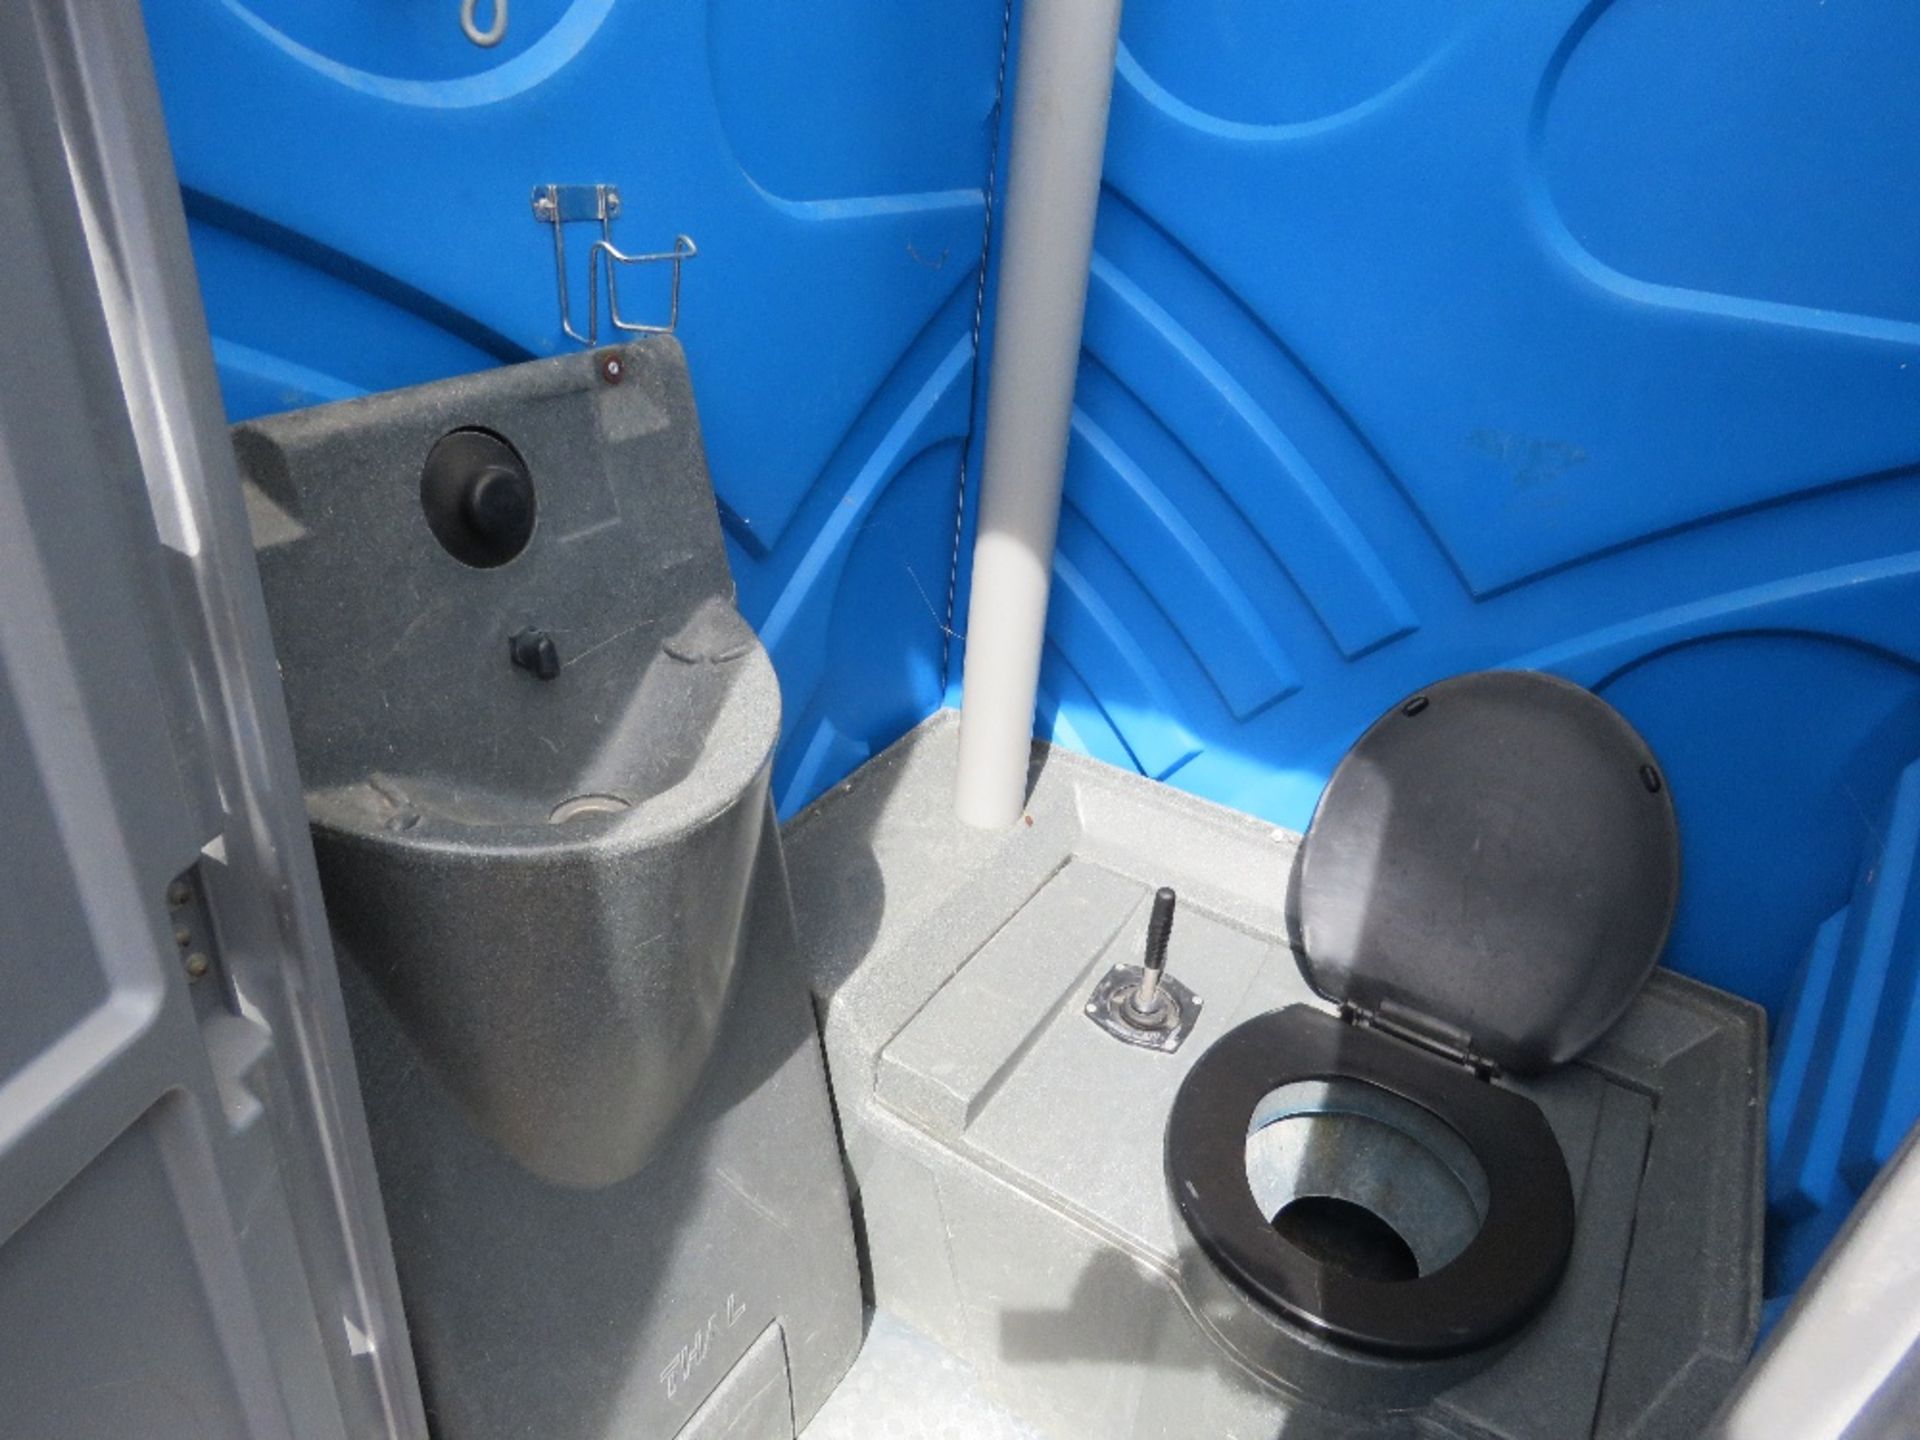 PORTABLE SITE / EVENTS TOILET, DIRECT FROM EVENTS COMPANY DUE TO ONGOING REPLACEMENT PRGRAMME. - Image 3 of 4